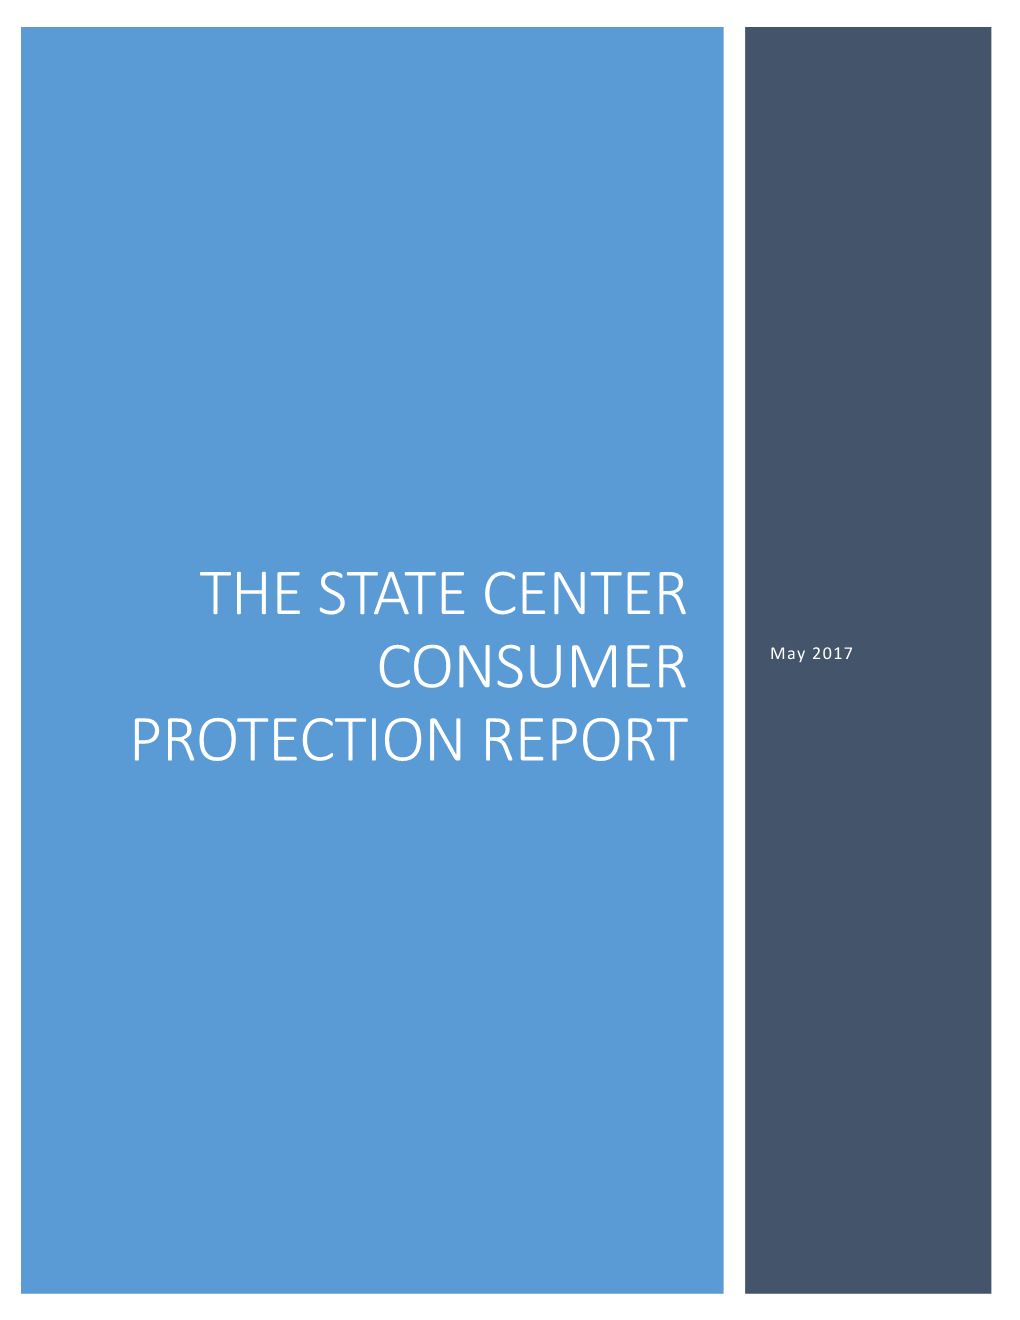 The State Center Consumer Protection Report